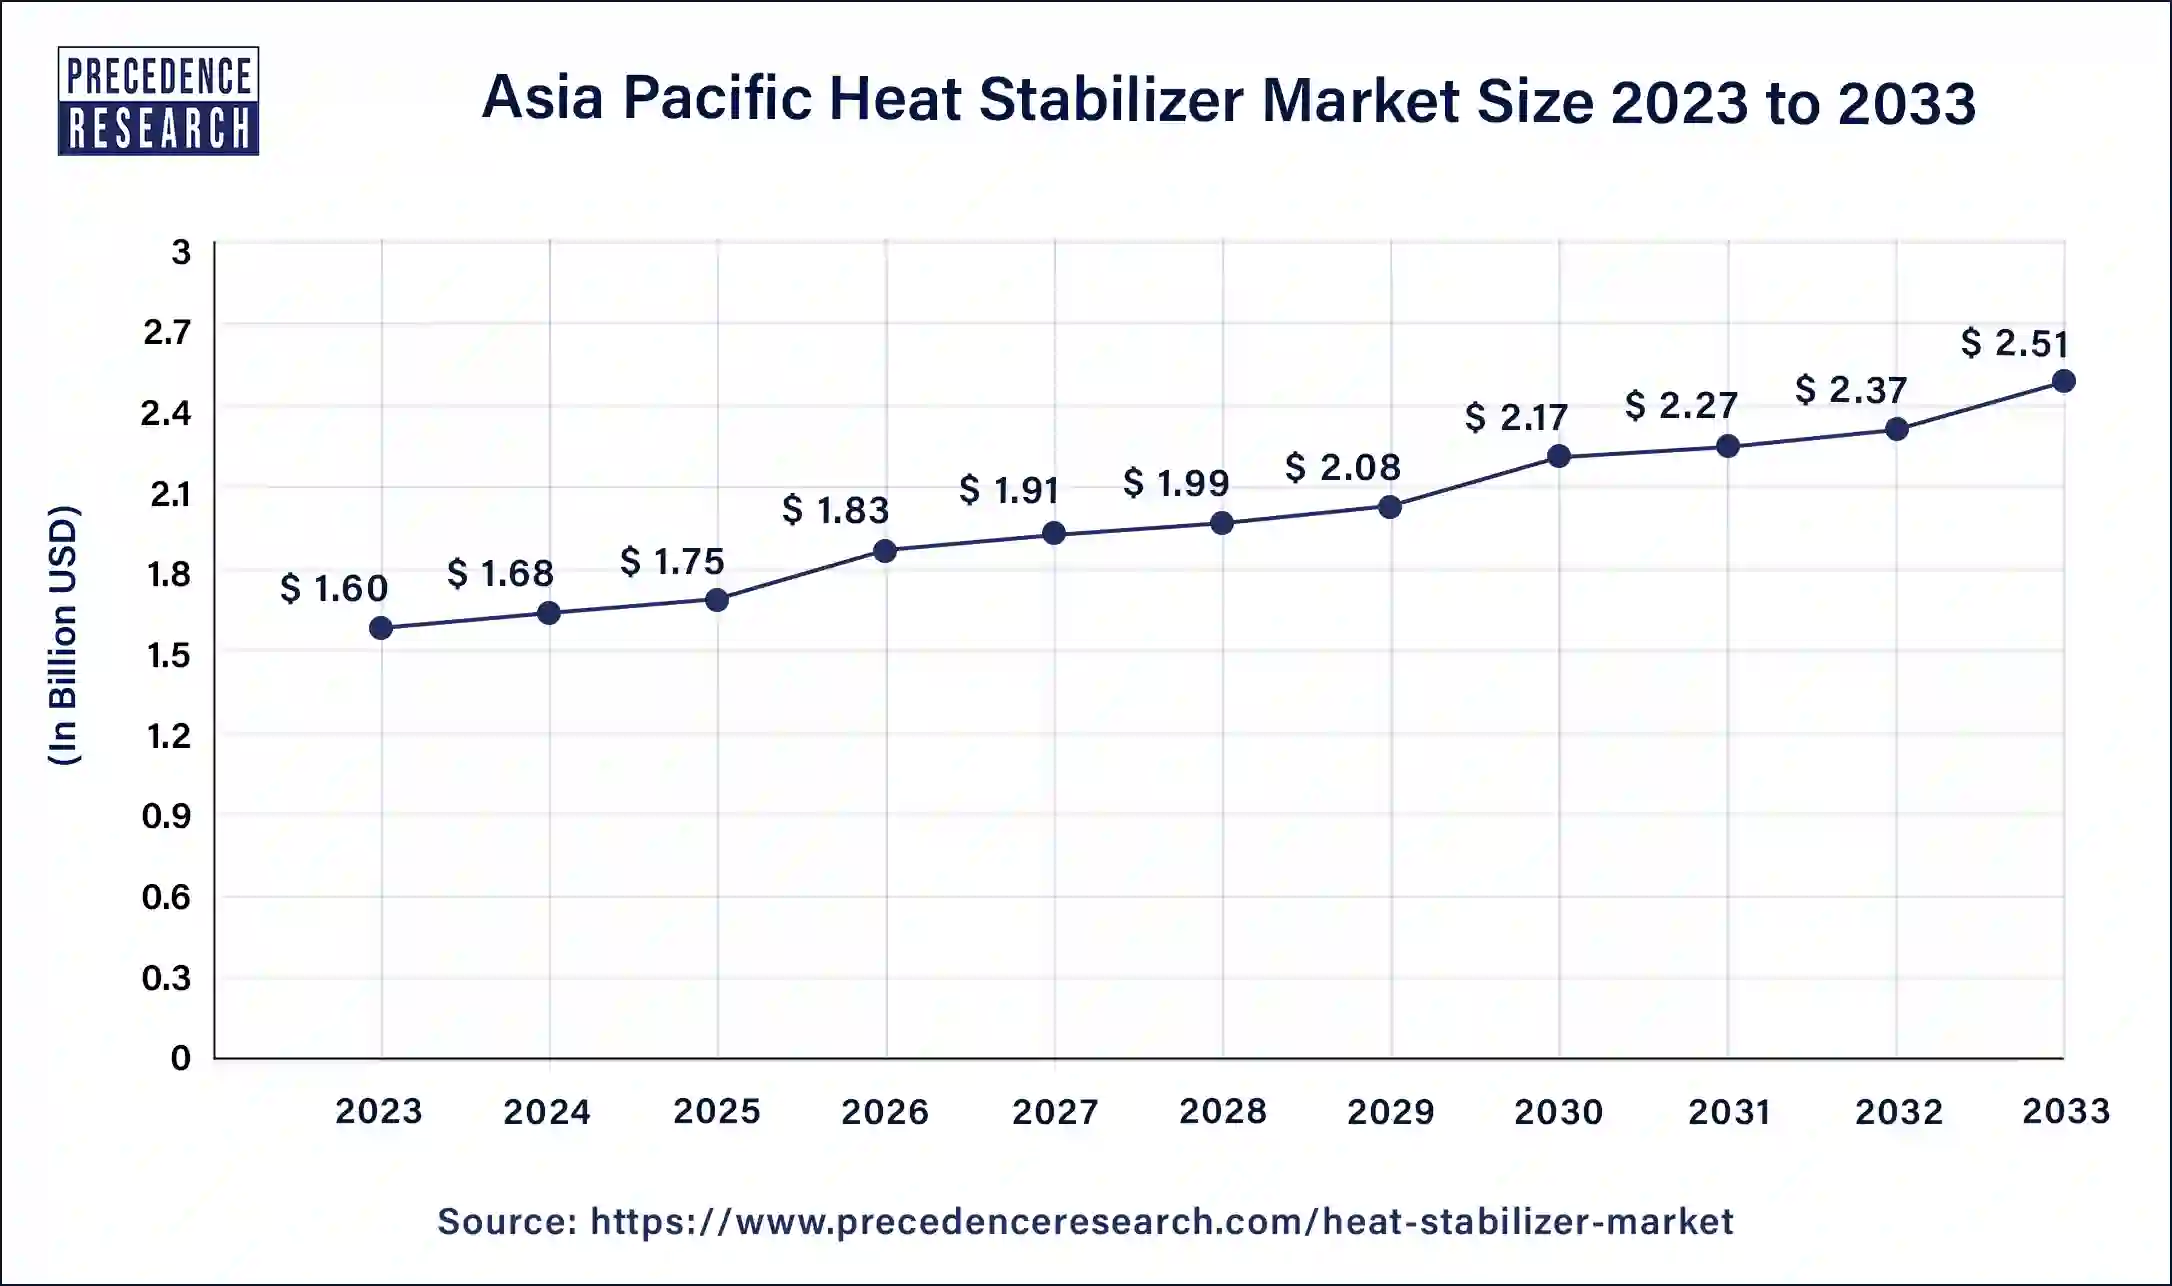 Asia Pacific Heat Stabilizer Market Size 2024 to 2033